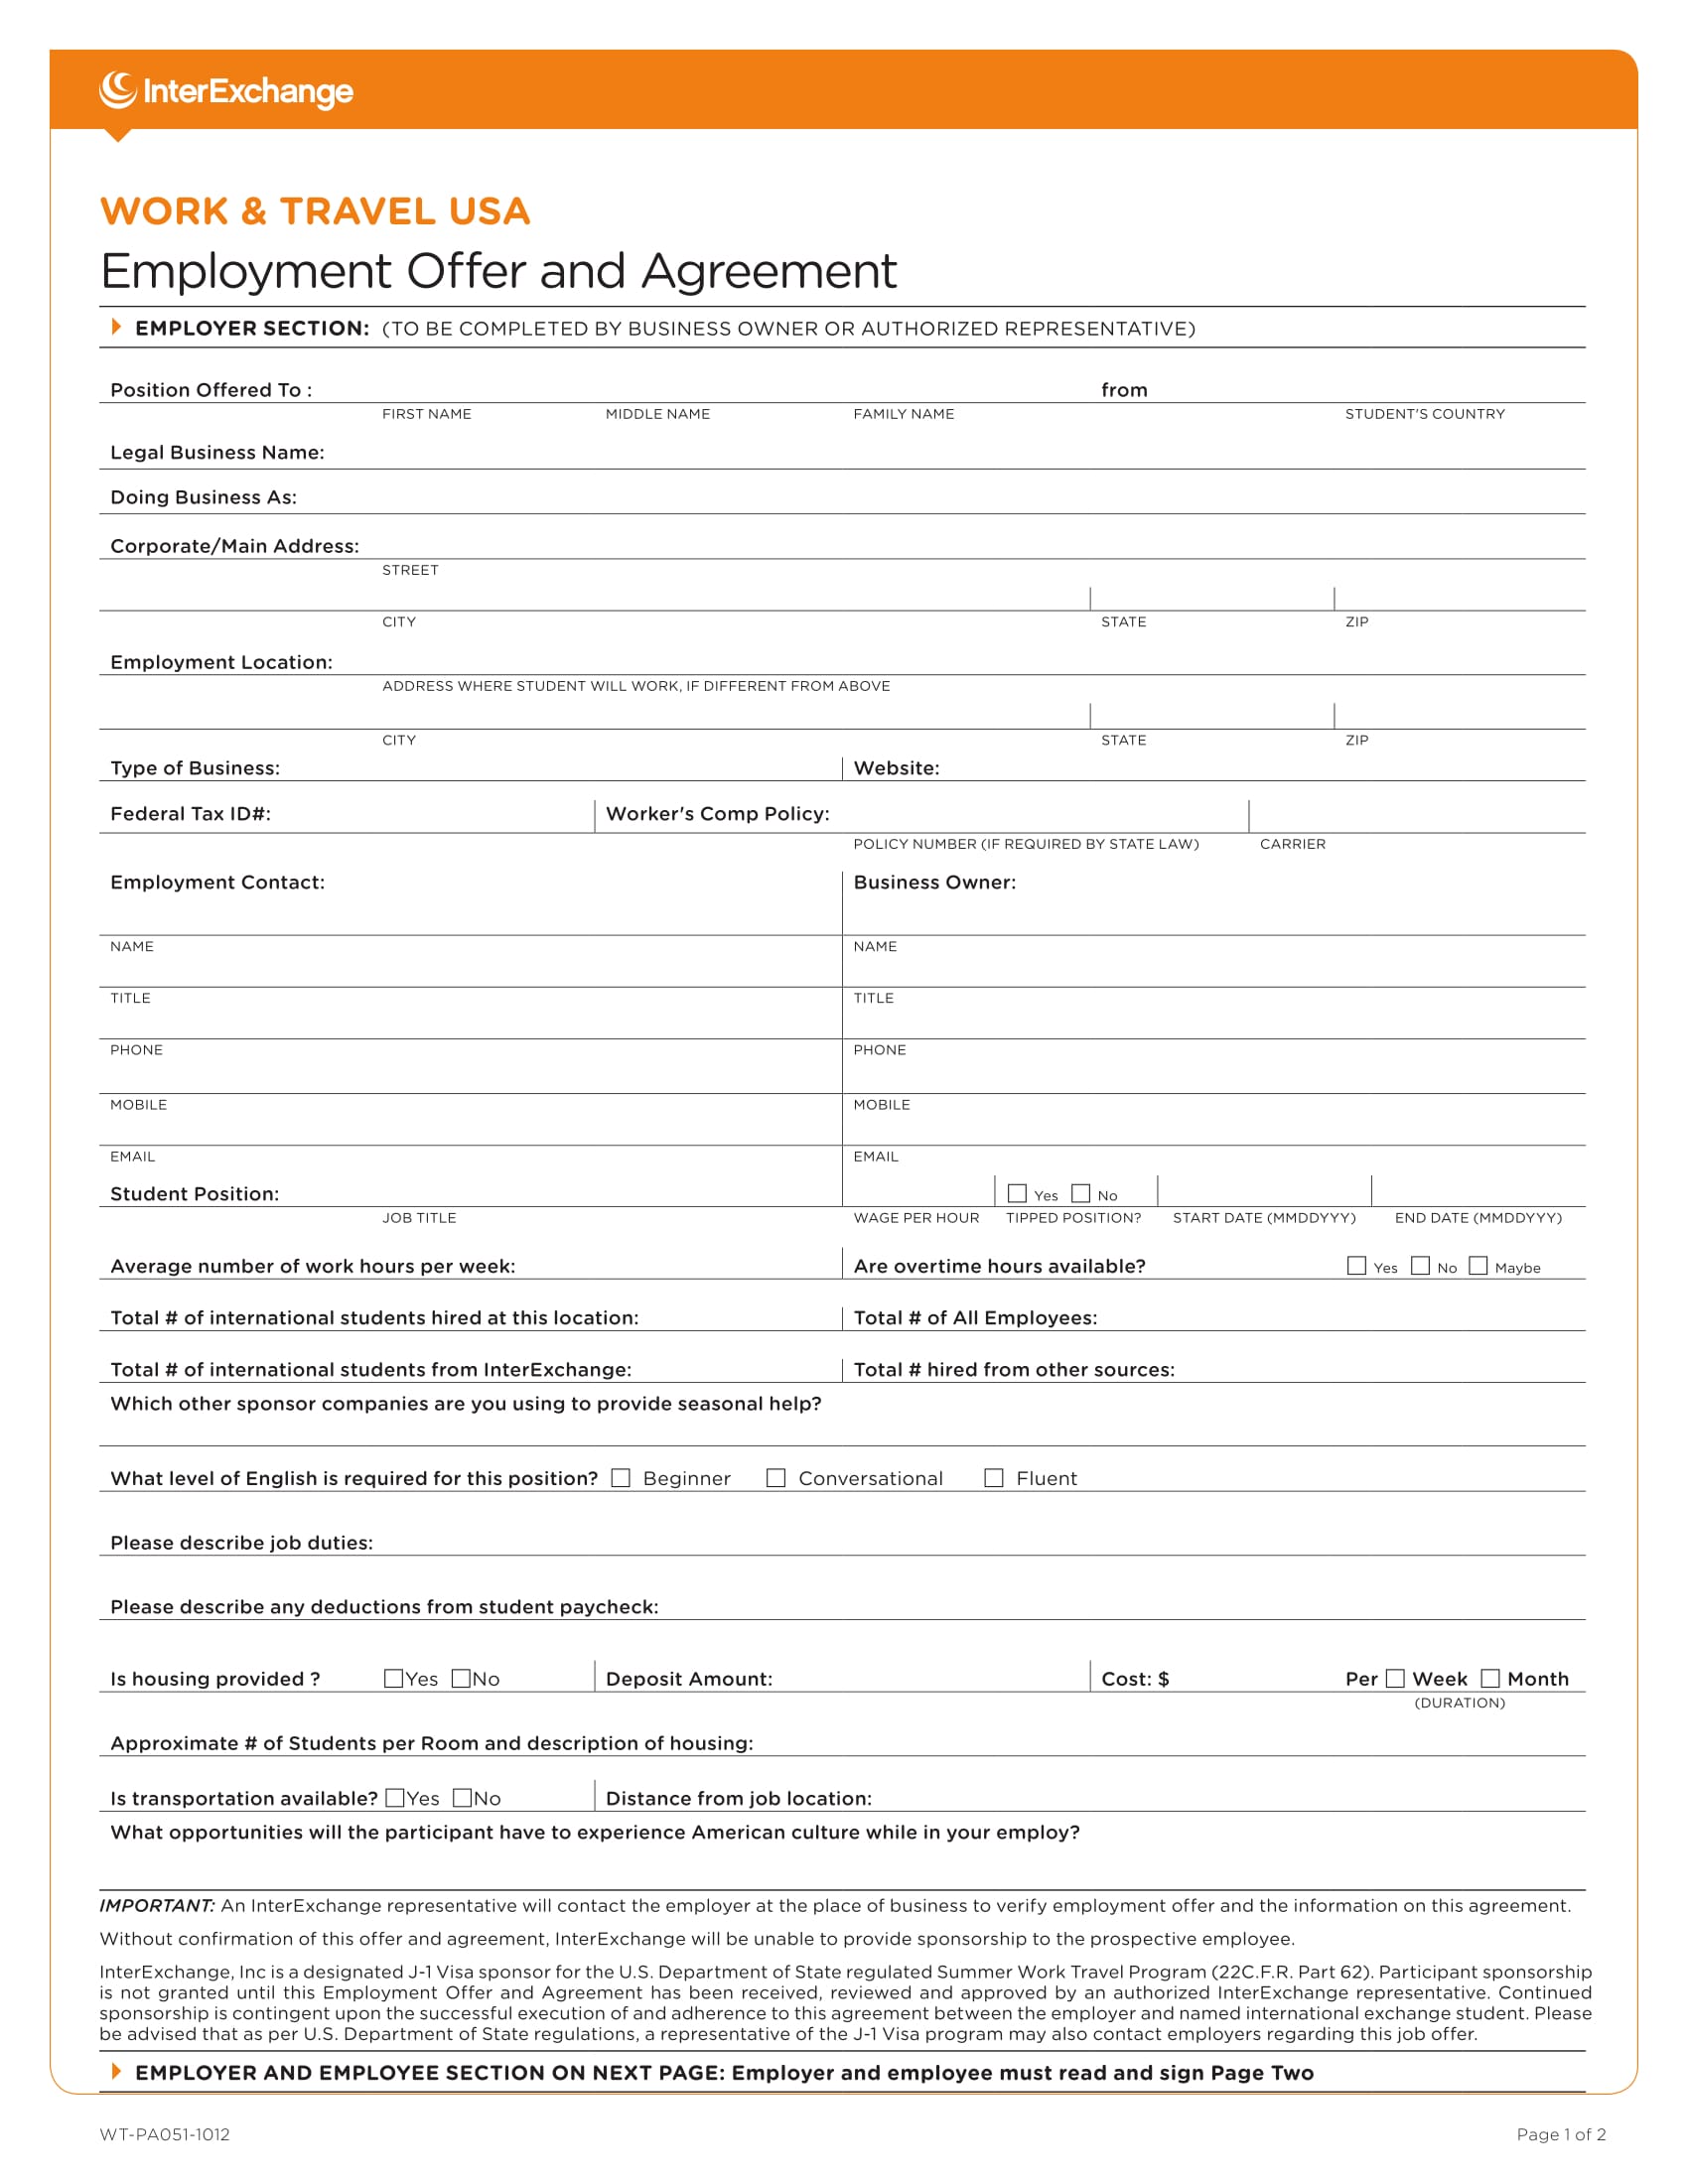 employment offer and agreement form 1